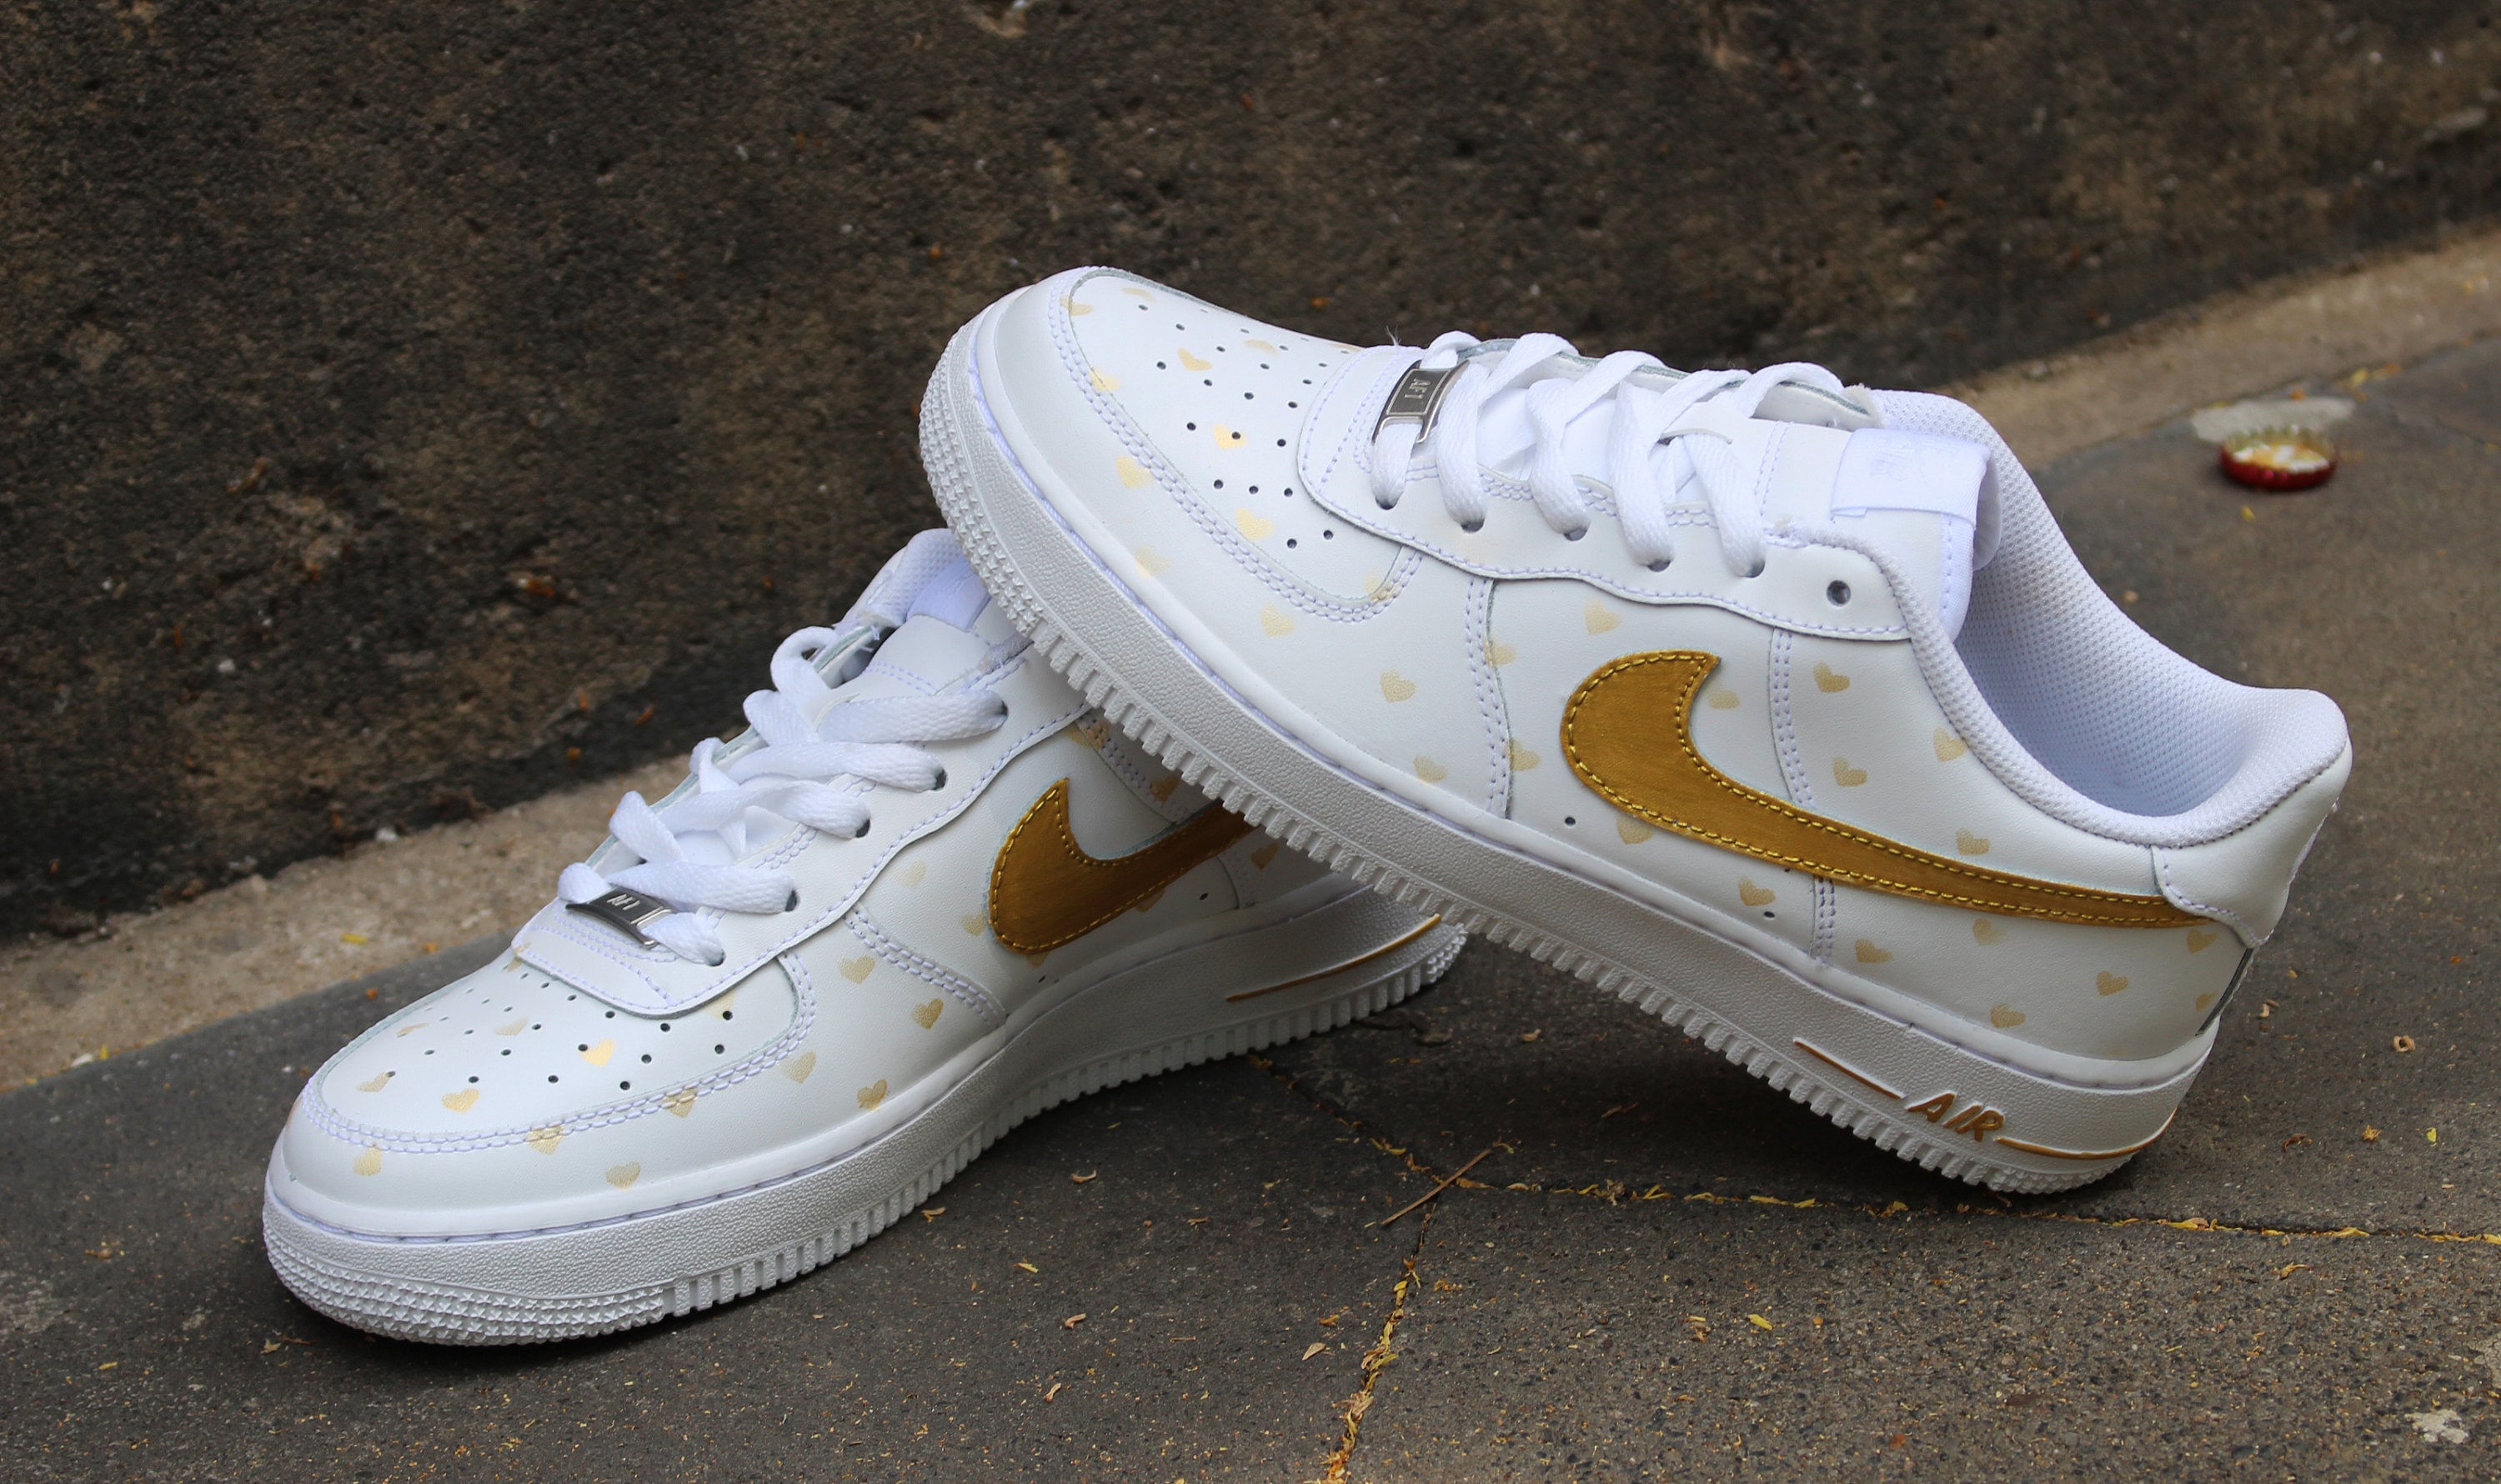 Custom Airbrush Nike Air Force 1 Gold Hearts Style Shoes -  Portugal